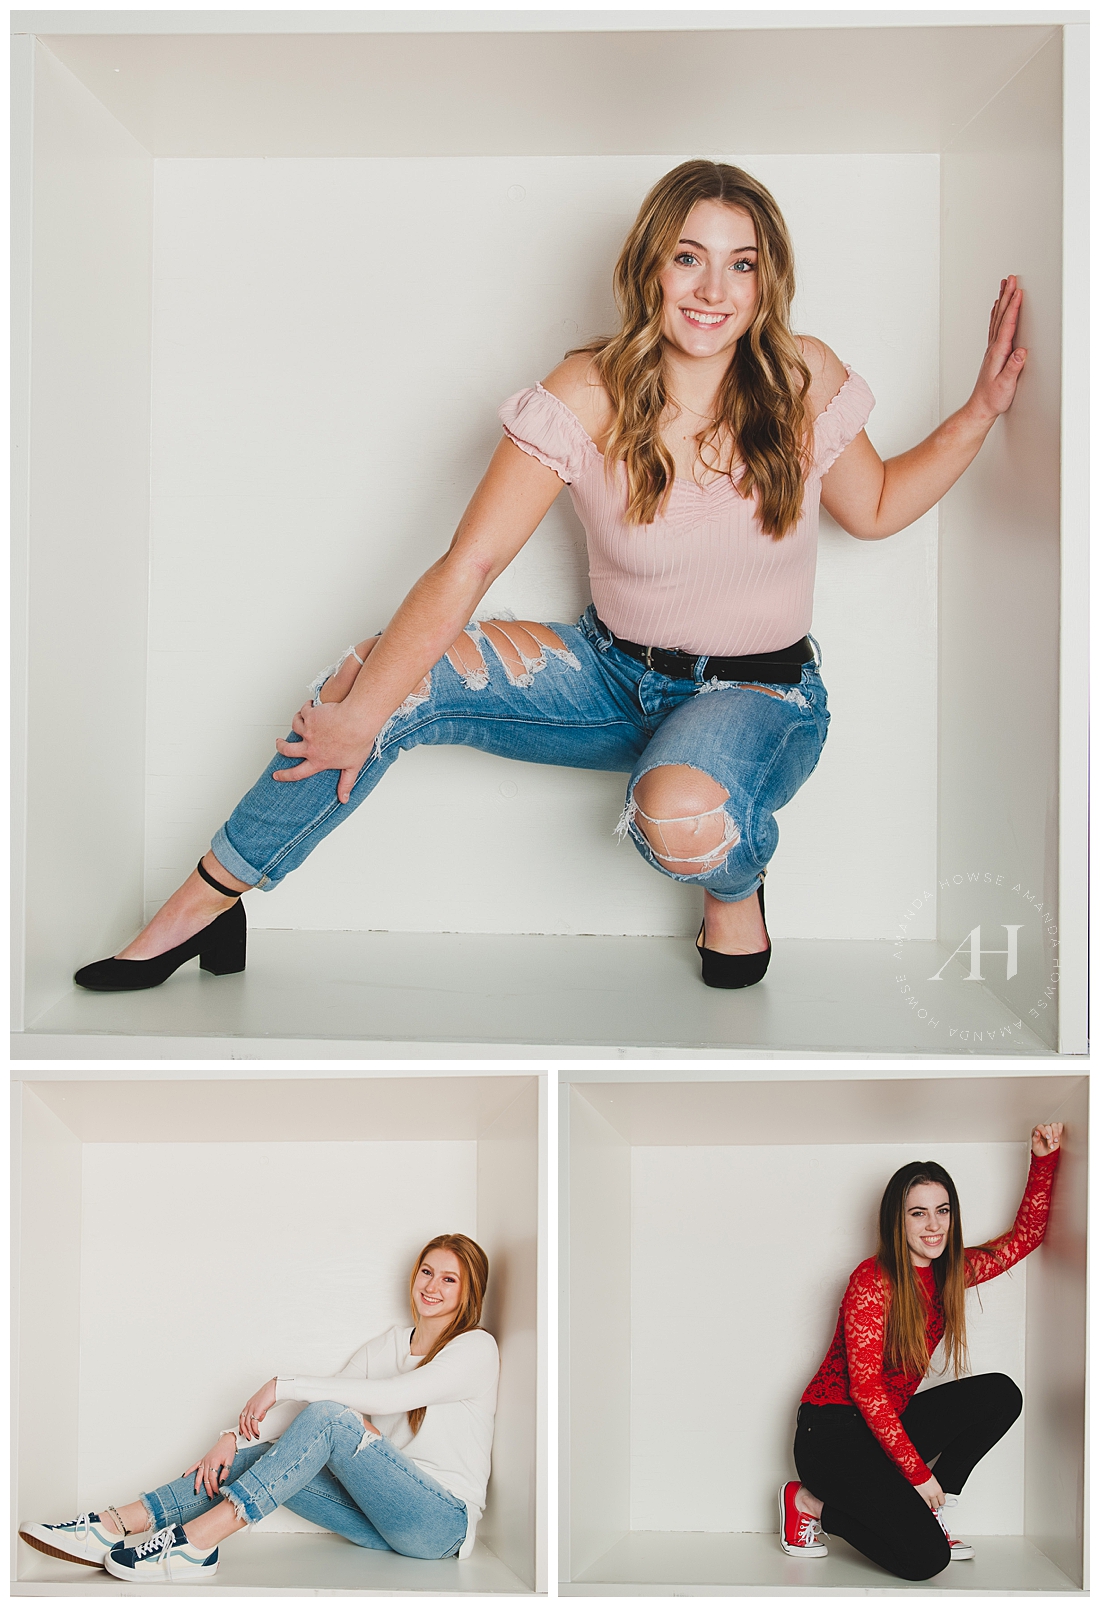 Cute White Box for Senior Portraits | Fun Hearts-Themed Photoshoot, Modern Studio Portraits in Tacoma, Studio 253, Pose Ideas for Senior Girls, Group Photoshoot with the AHP Model Team | Photographed by the Best Tacoma Senior Portrait Photographer Amanda Howse